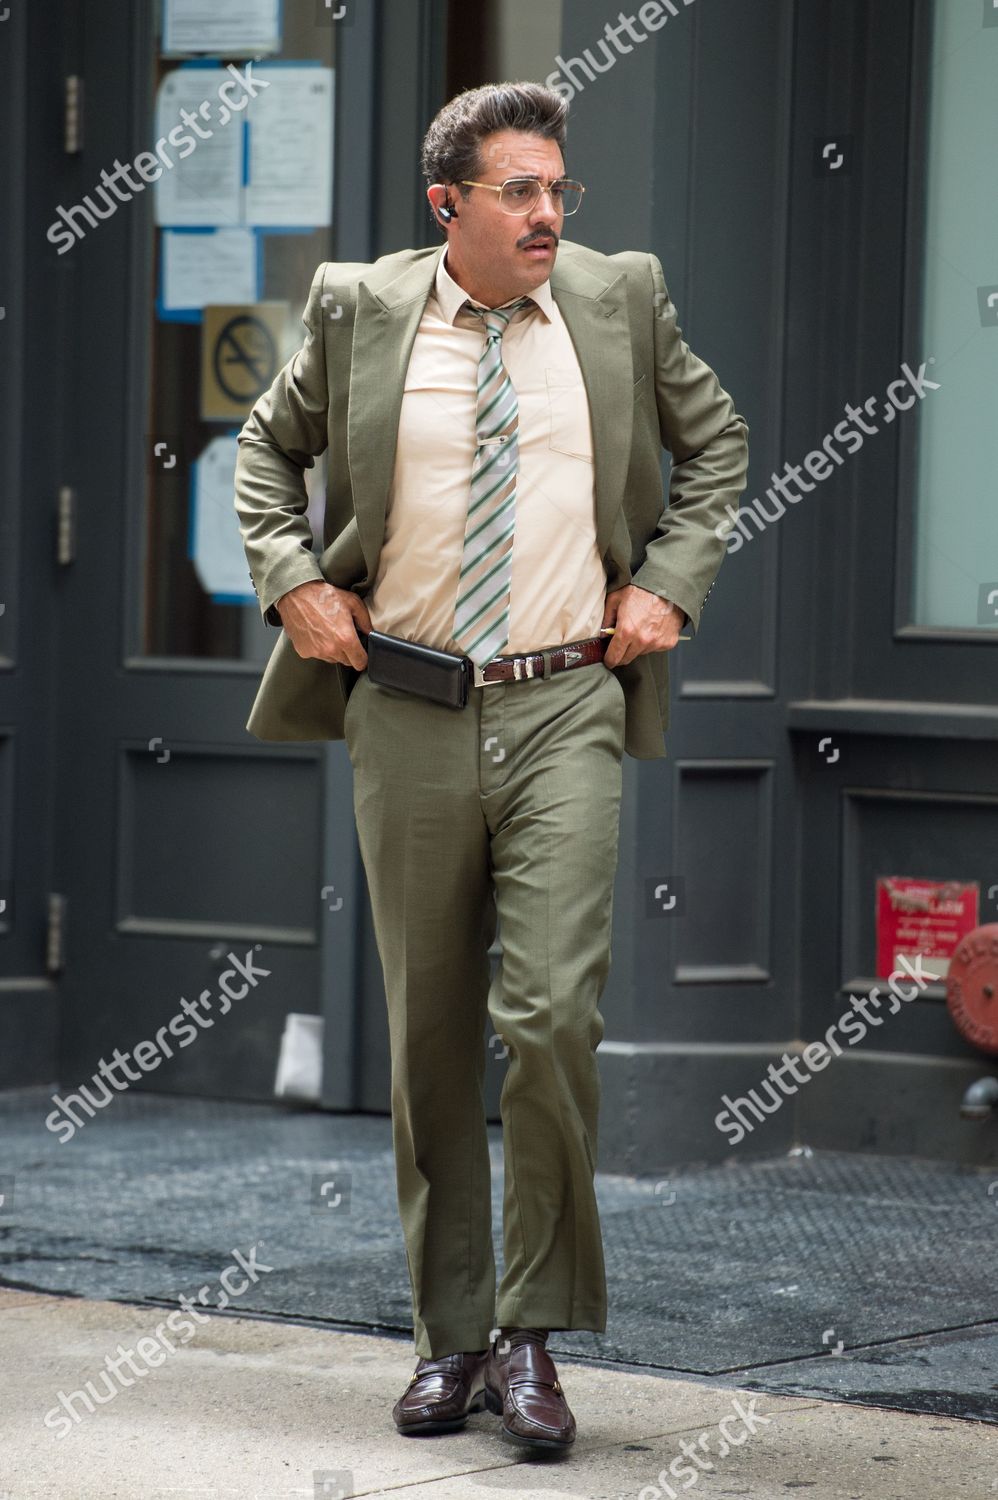 Bobby Cannavale Editorial Stock Stock Image | Shutterstock